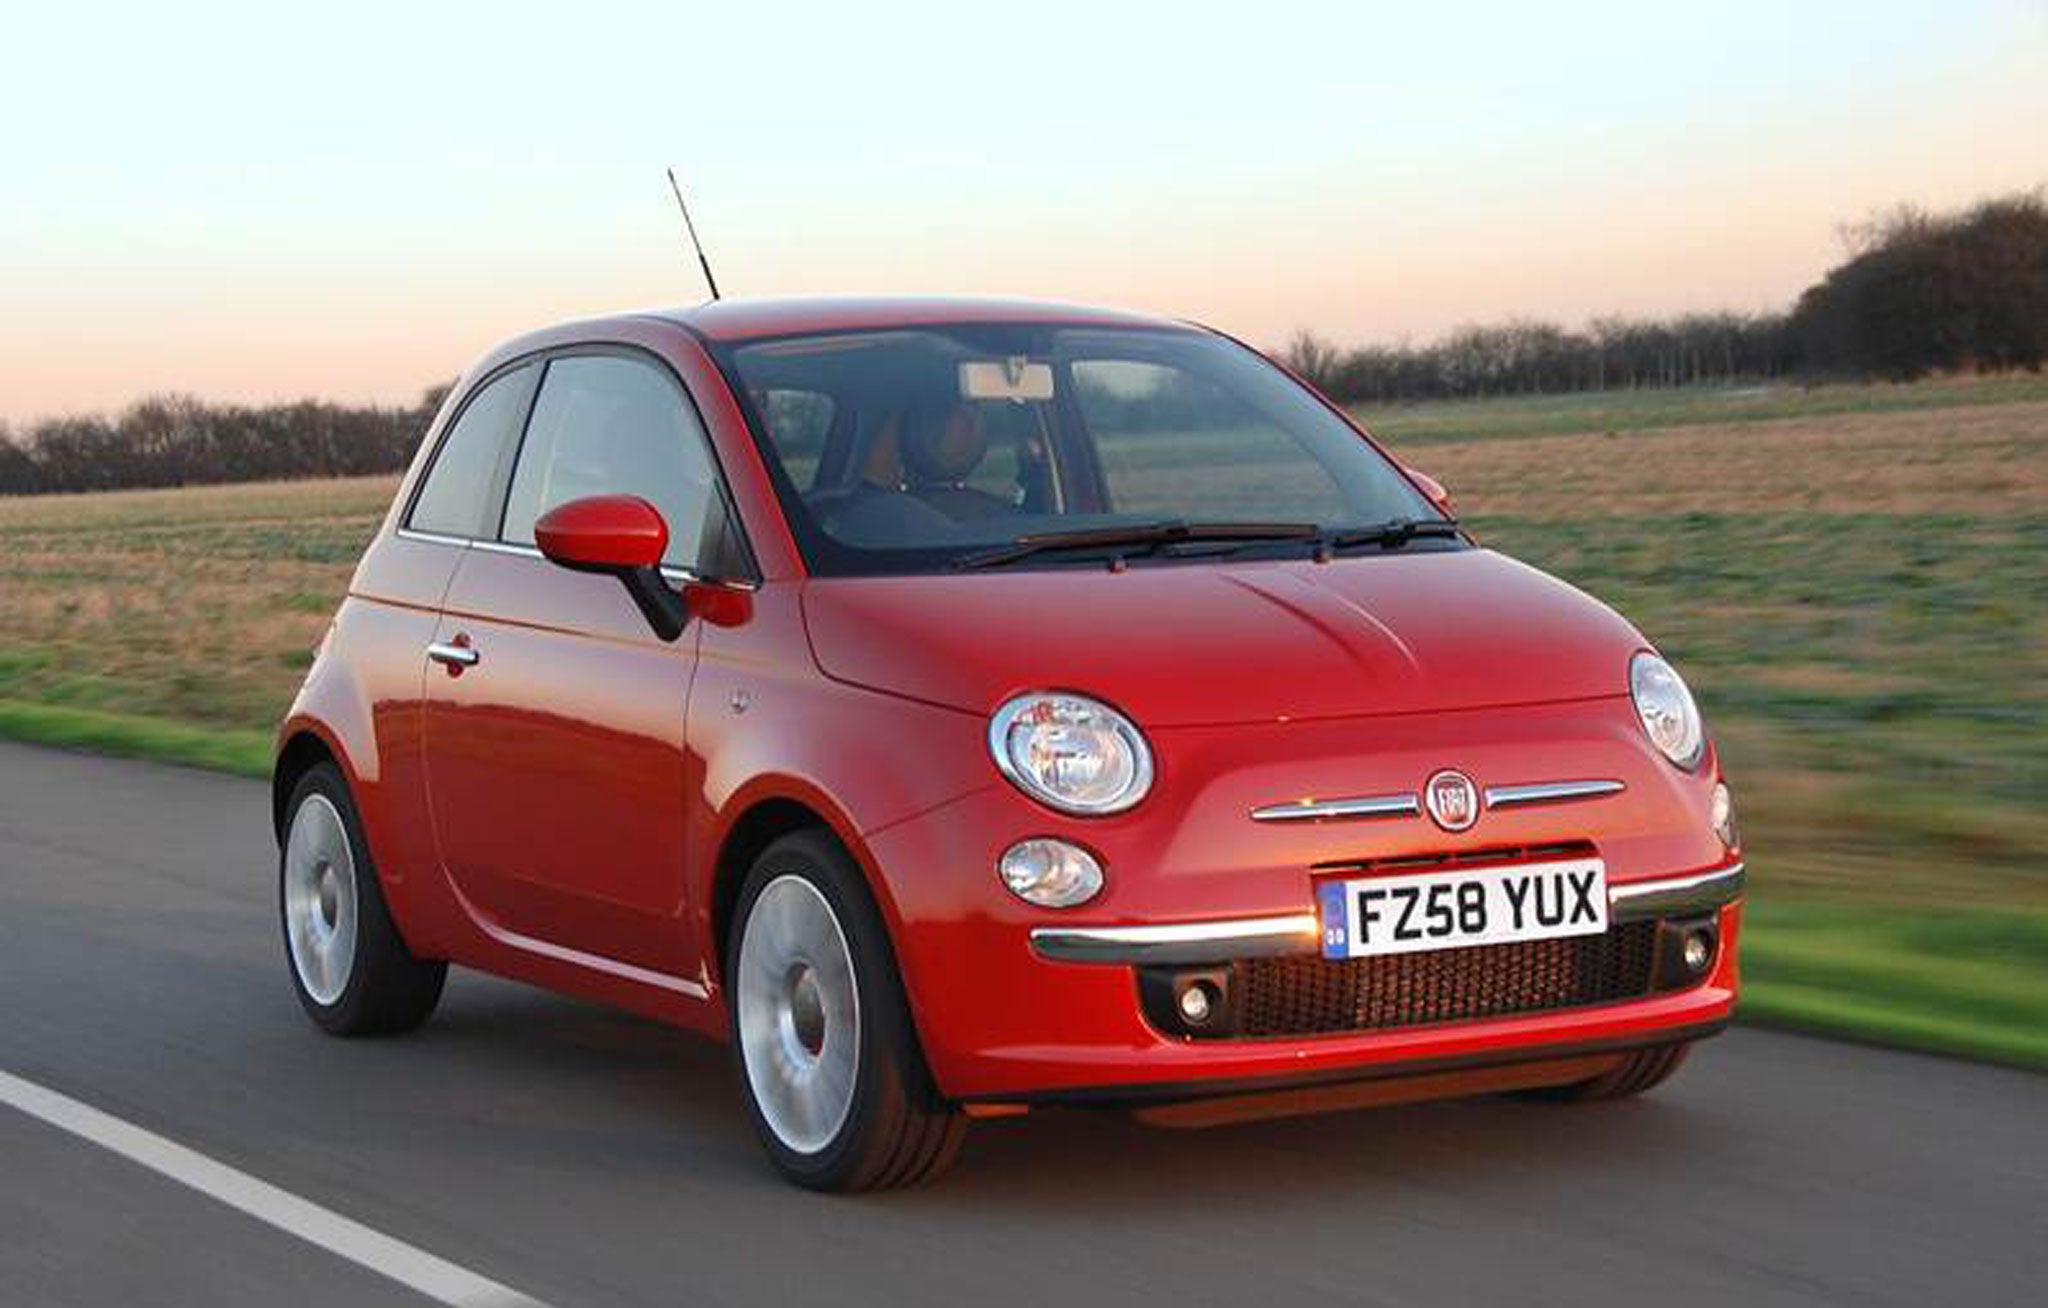 Stylish option: The Fiat 500 is easy to fall in love with